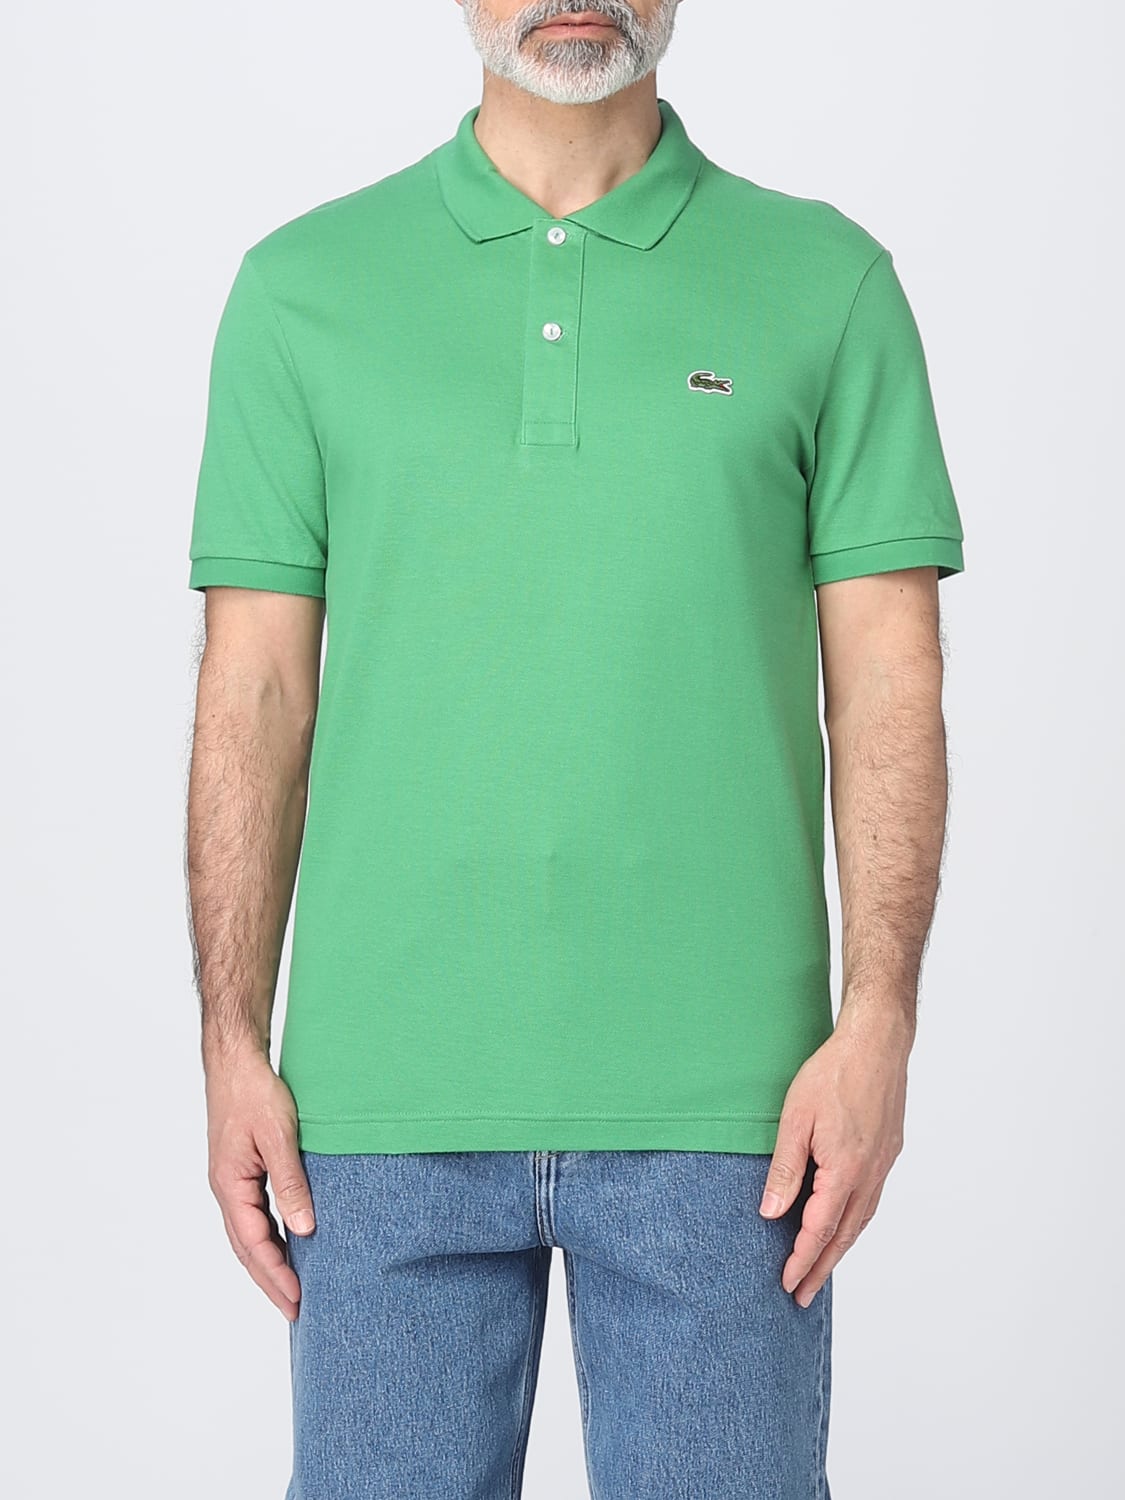 LACOSTE: shirt for man - Moss Green Lacoste polo shirt PH4012 on GIGLIO.COM